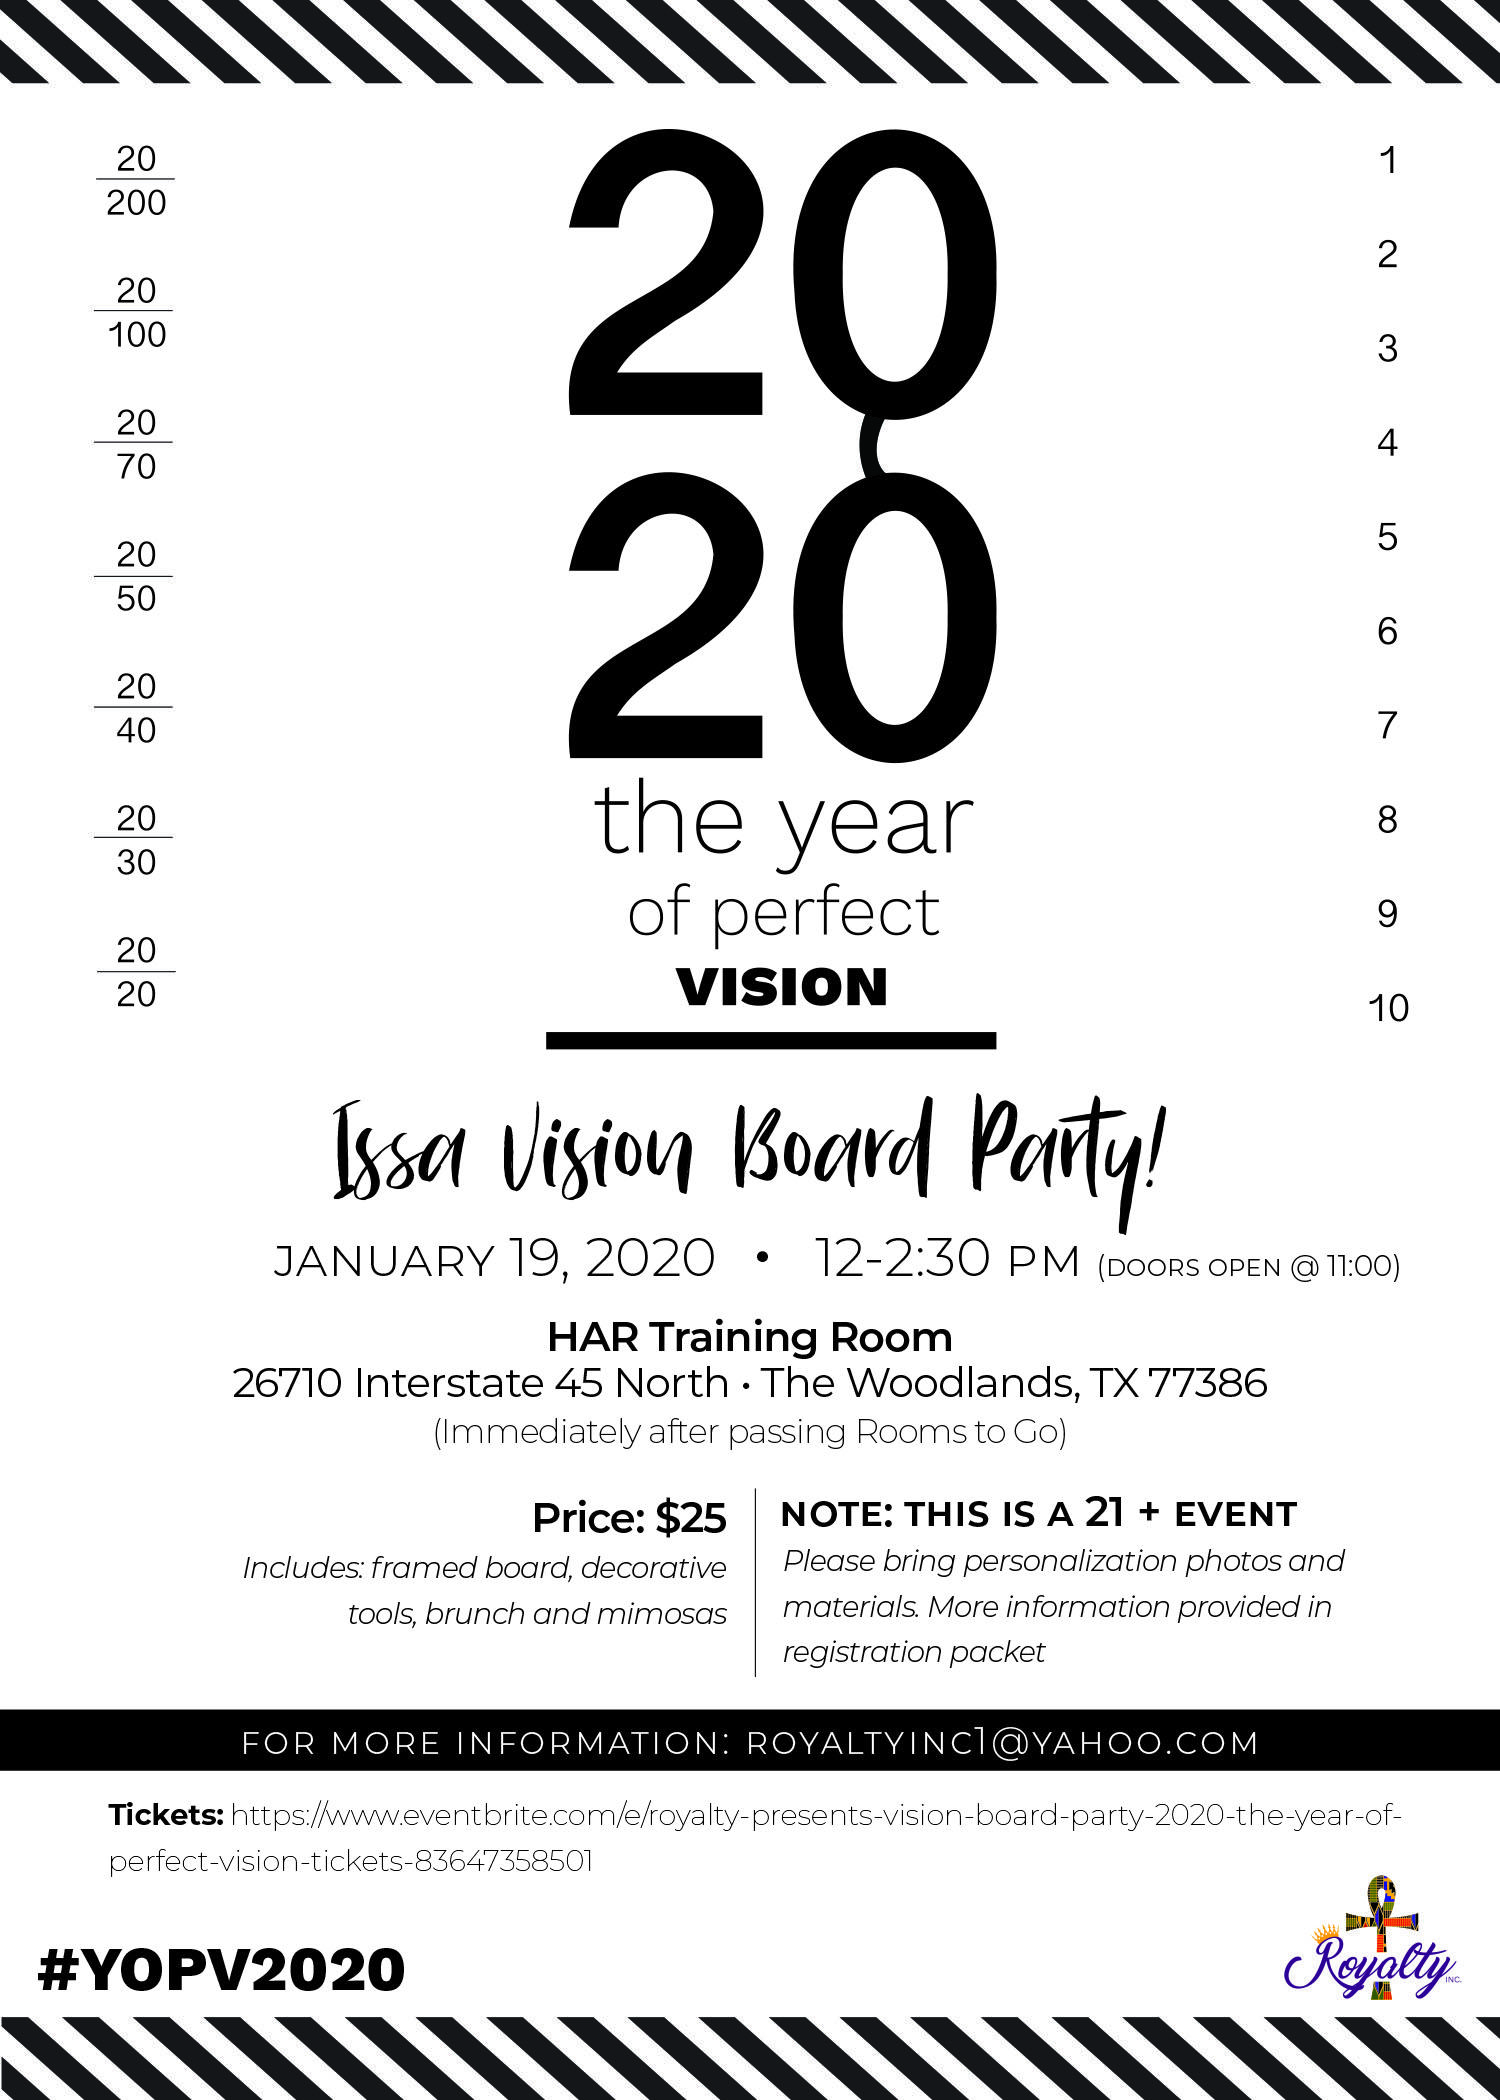 Royalty Presents: Vision Board Party 20/20 The Year of Perfect Vision